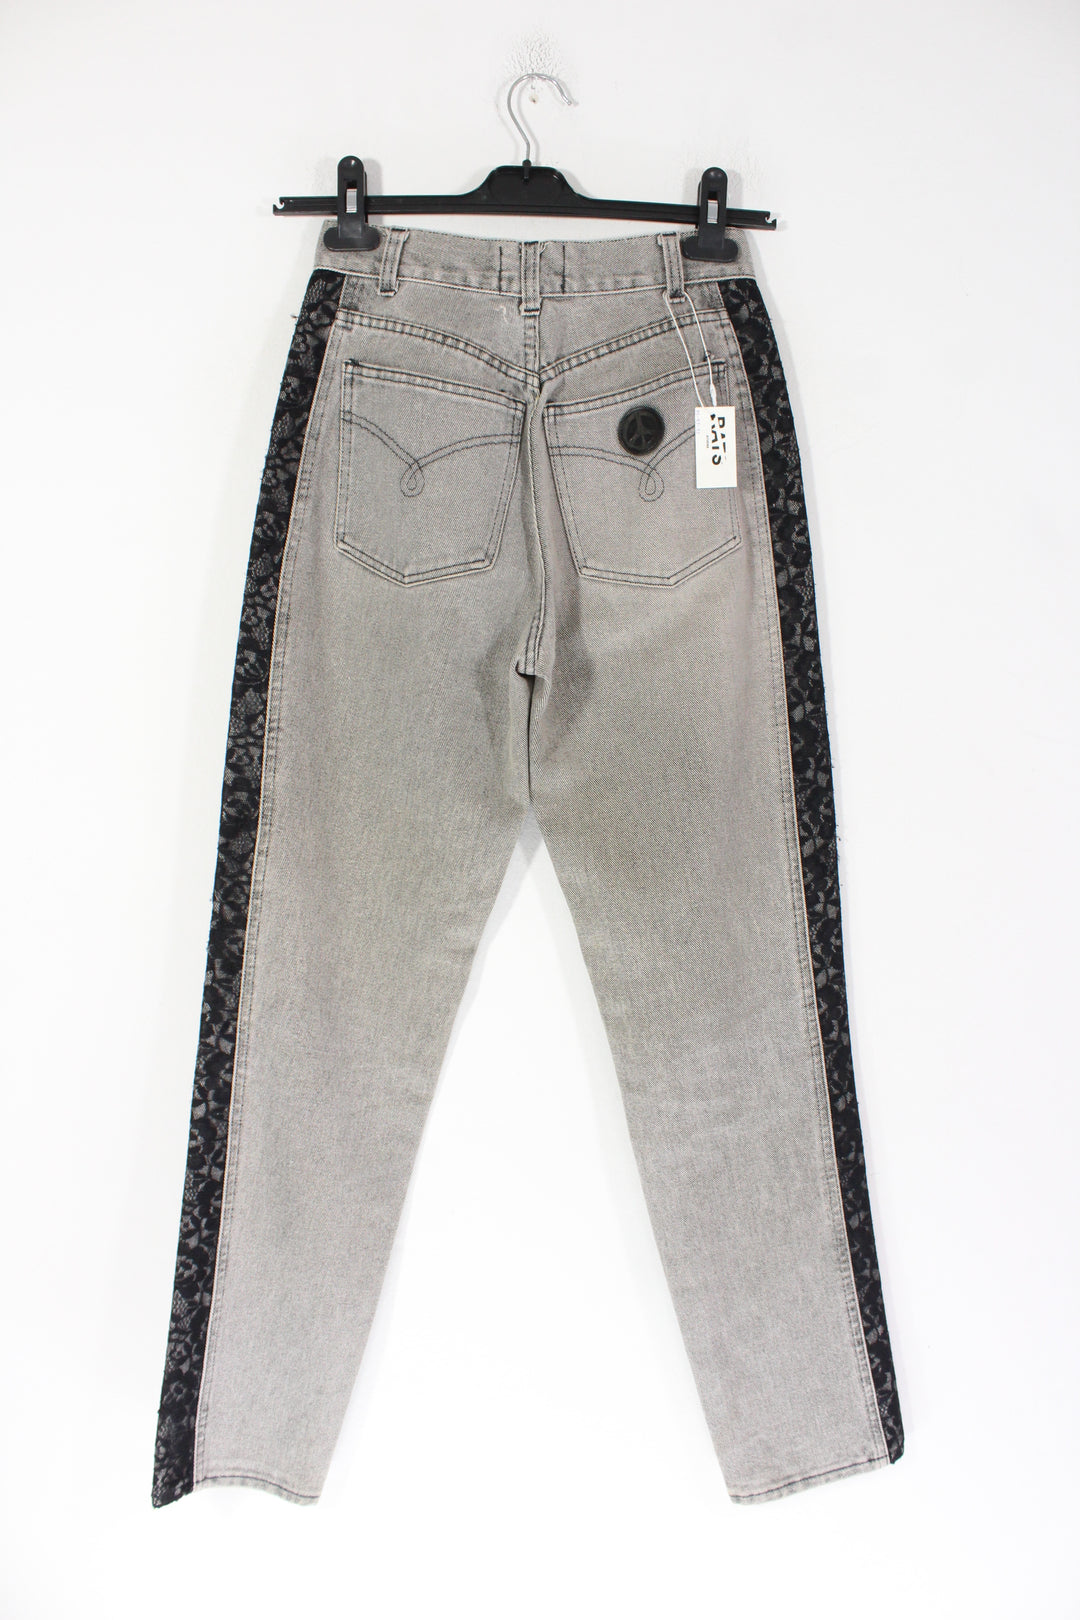 Moschino Jeans w/ lace details Women's Small(34)